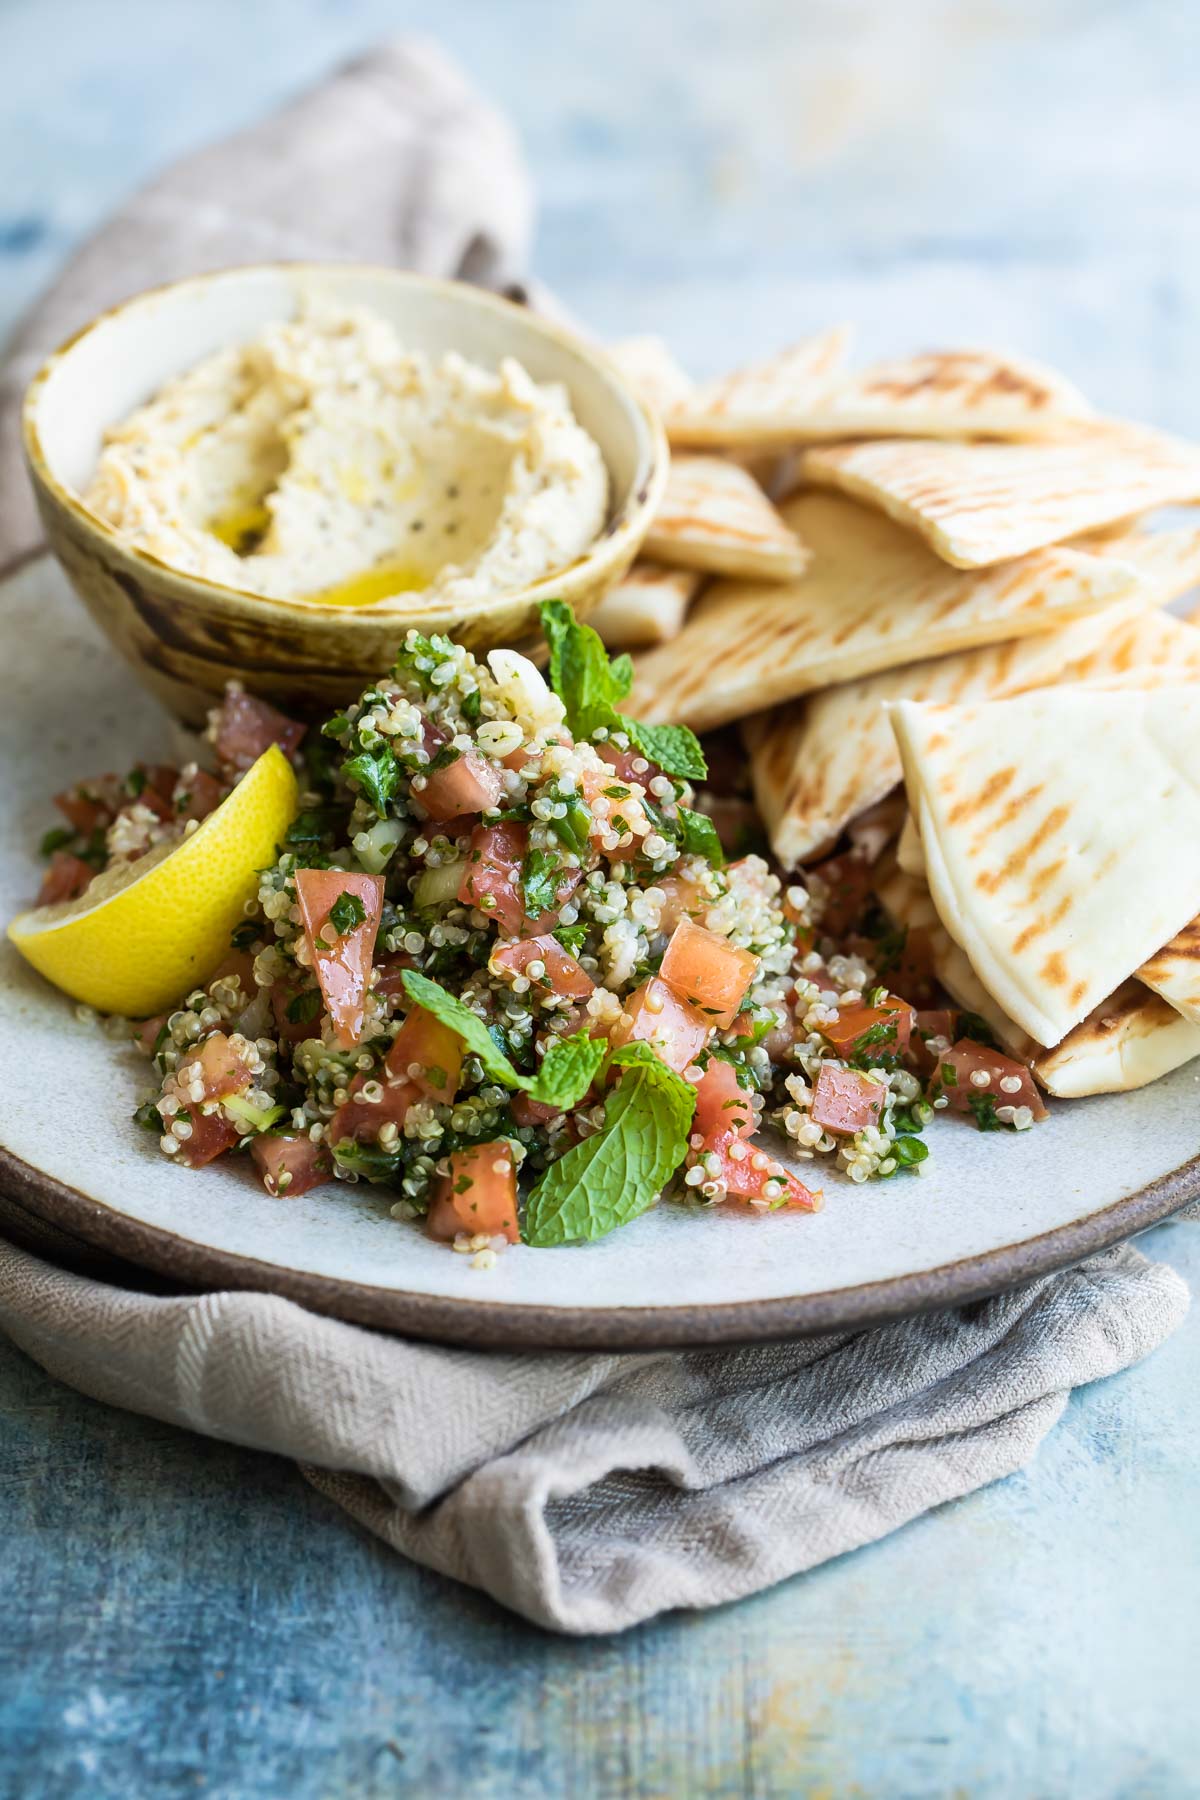 Quinoa tabbouleh on a plate with a side of hummus and pita triangles.